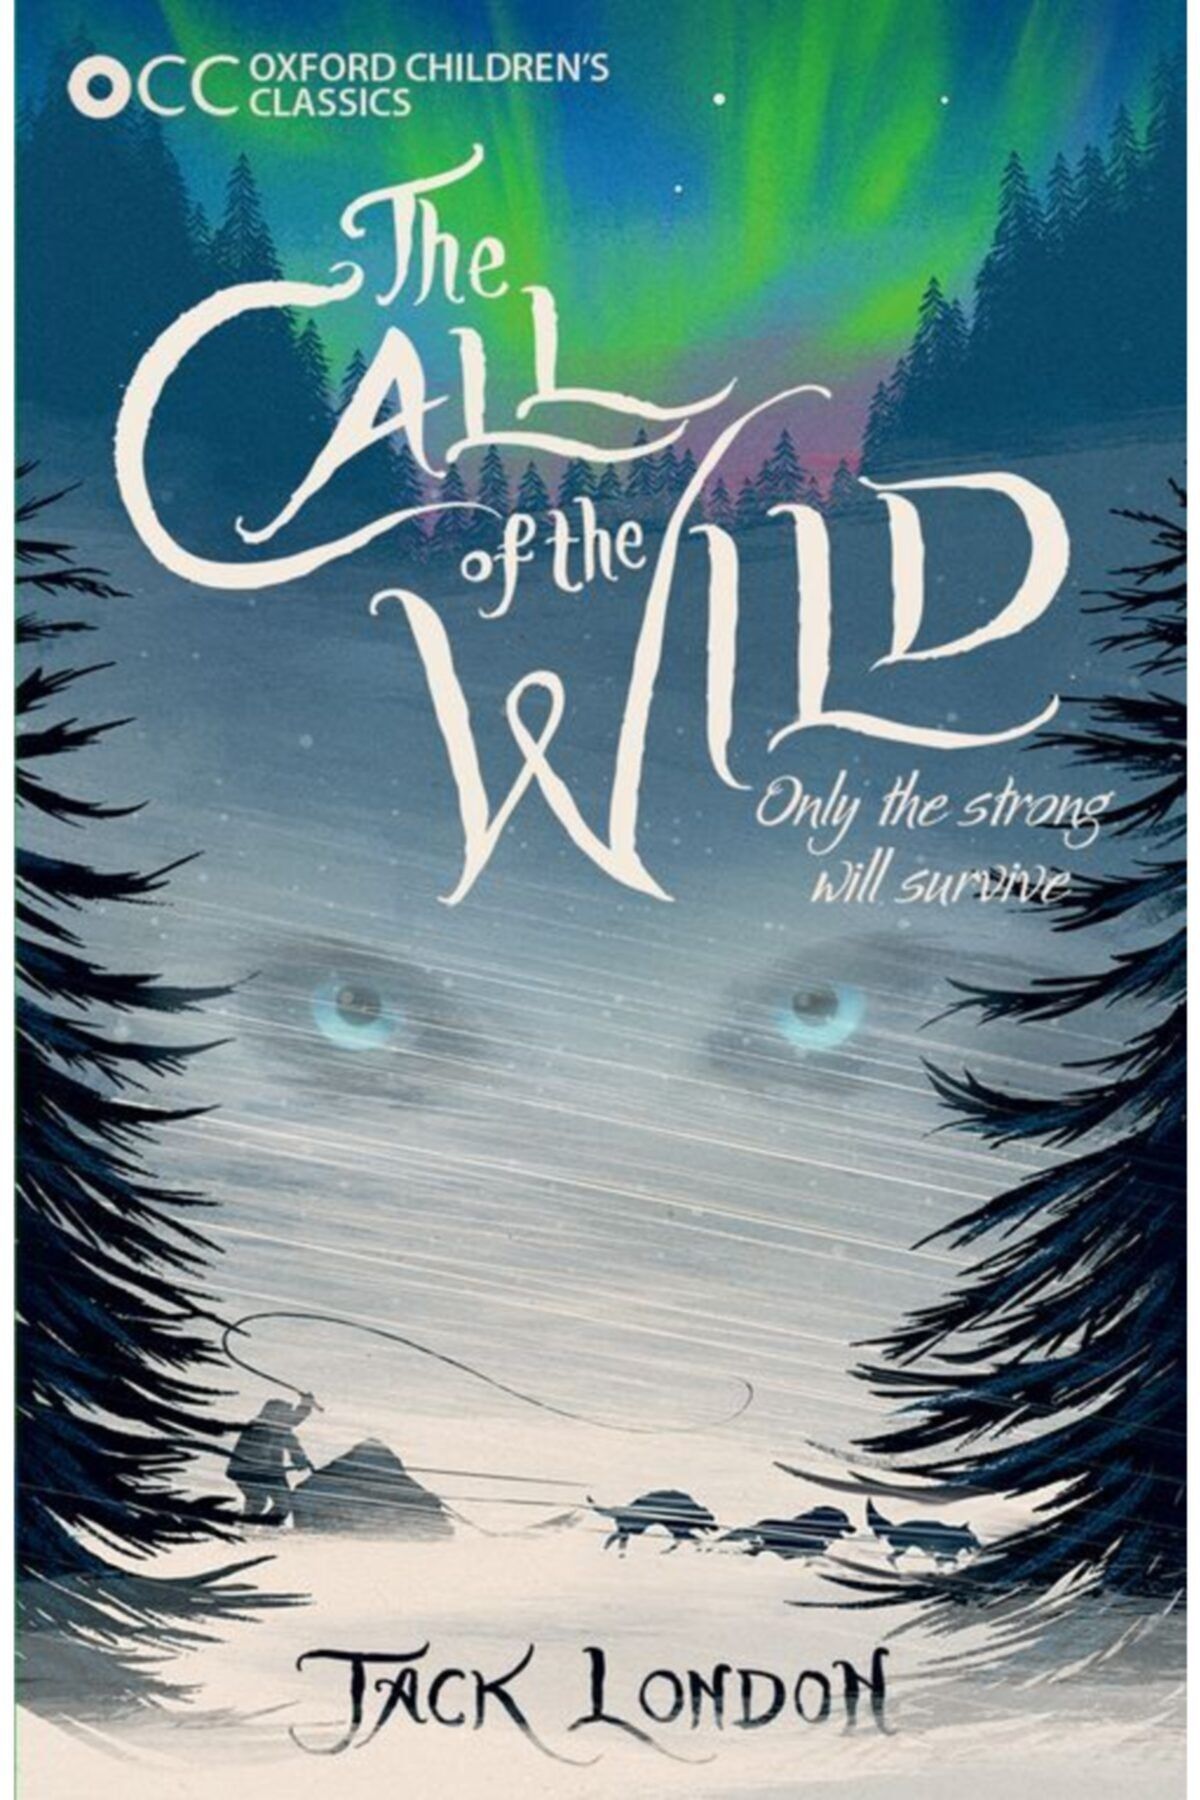 OXFORD UNIVERSITY PRESS The Call Of The Wild